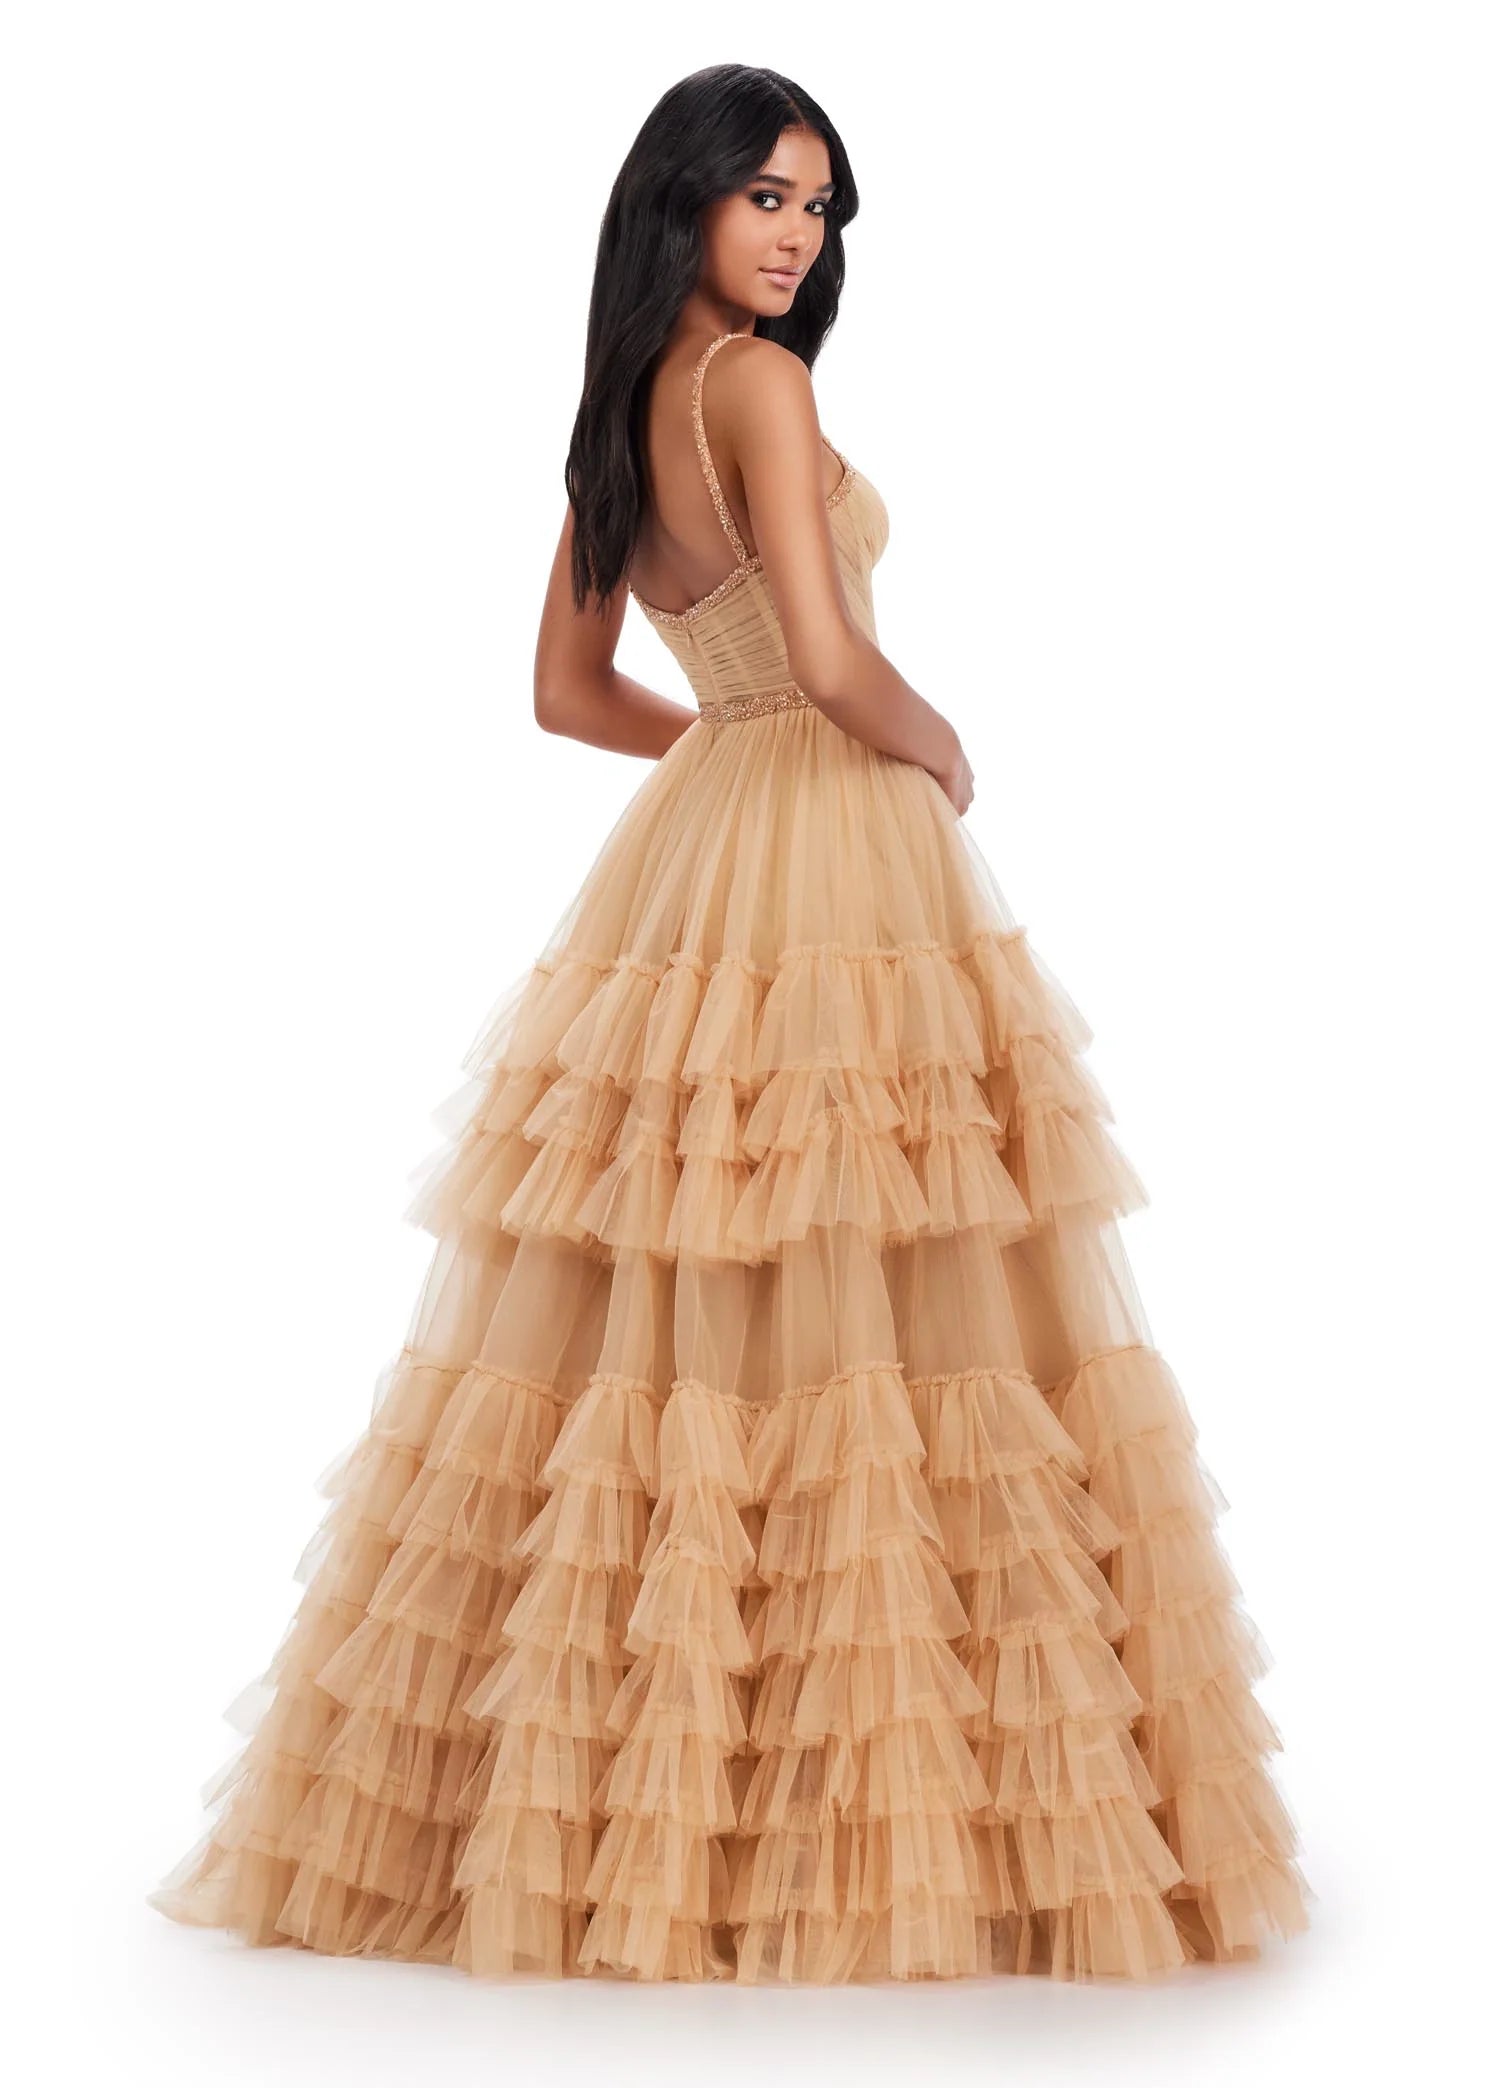 The Ashley Lauren11603 Long Tulle Ruffle Layer Ballgown Prom Dress is the perfect choice for your special occasion. With a beaded corset and ruffled layers for movement, this gown adds the perfect amount of glamour and elegance. Expertly tailored and designed, this dress will make you look and feel like royalty.